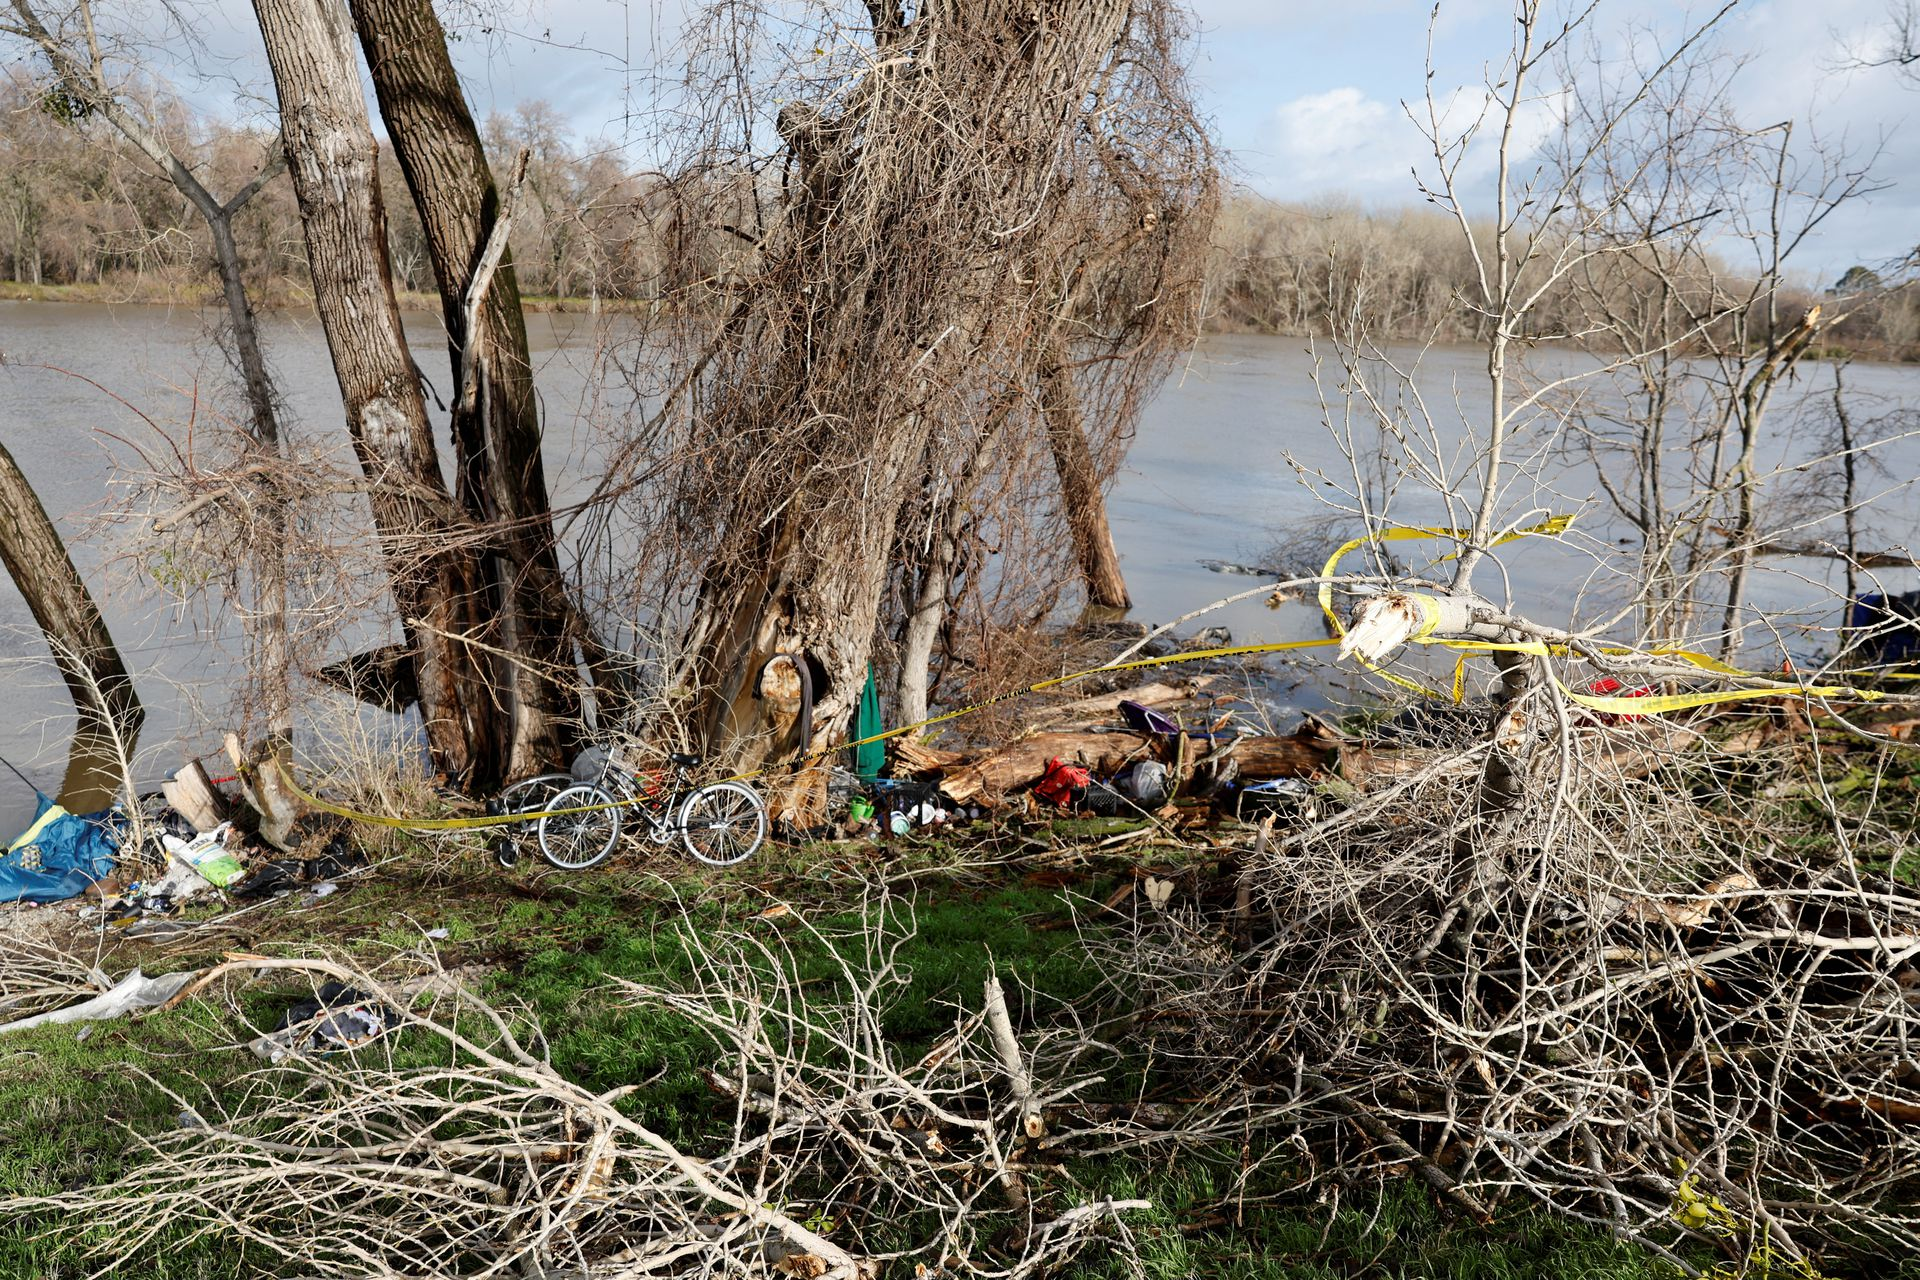 A view of a scene where a homeless woman was killed by a falling tree branch during a winter storm, at the bank of the Sacramento River in Sacramento, California, U.S. 8 January 2023. Photo: Fred Greaves / REUTERS